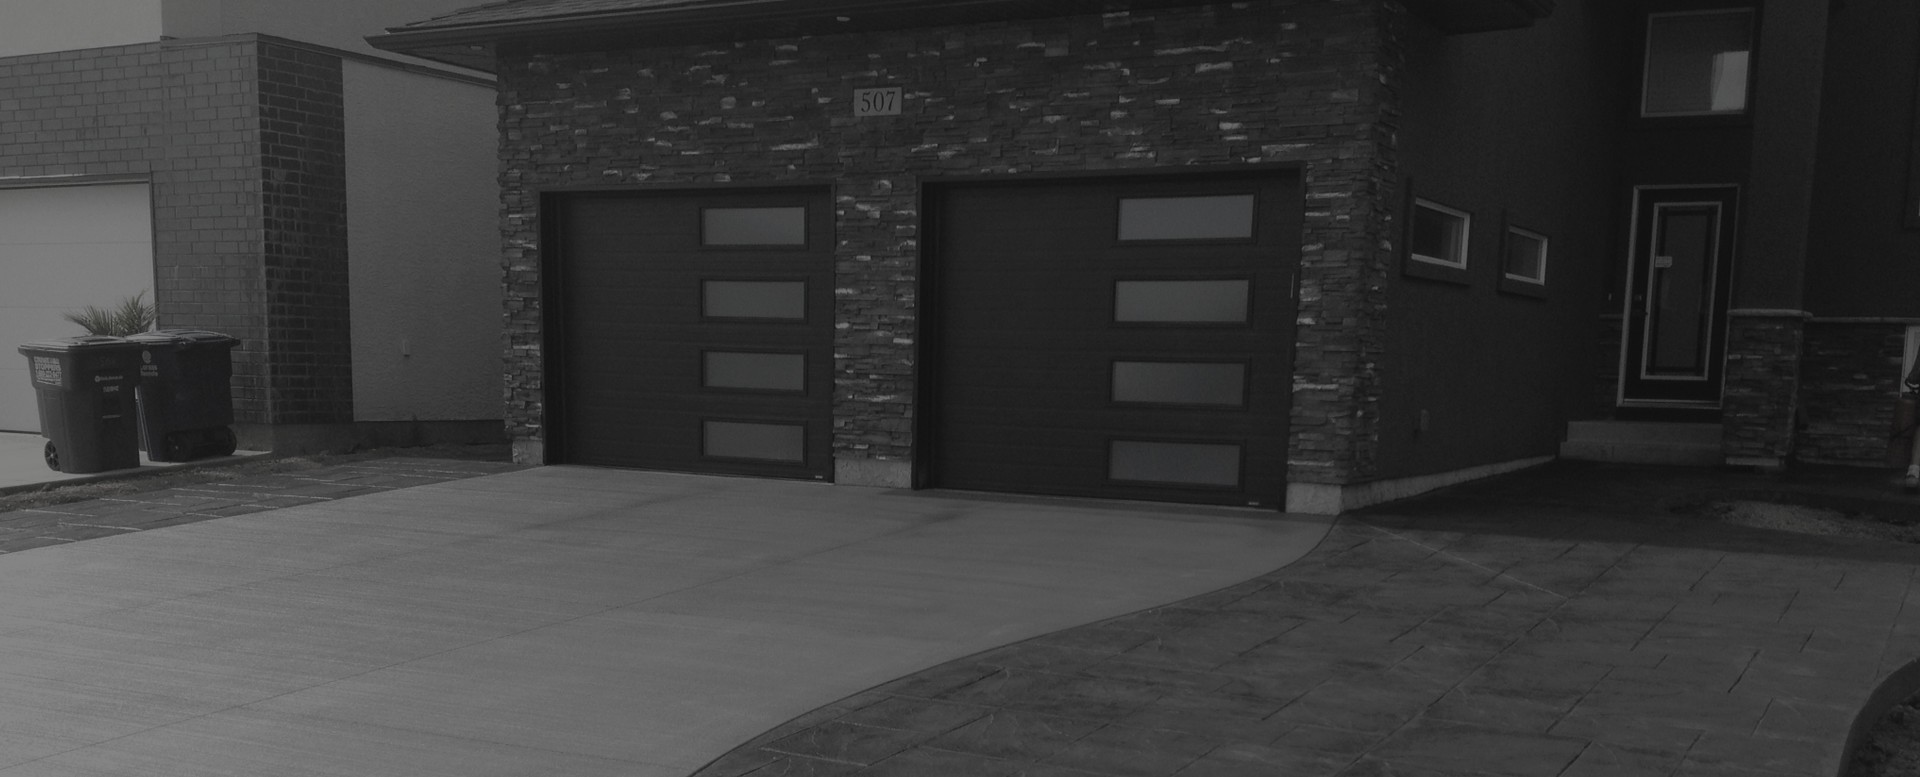 Beautiful, durable concrete driveways, walkways and patios can instantly enhance your home's curb appeal.